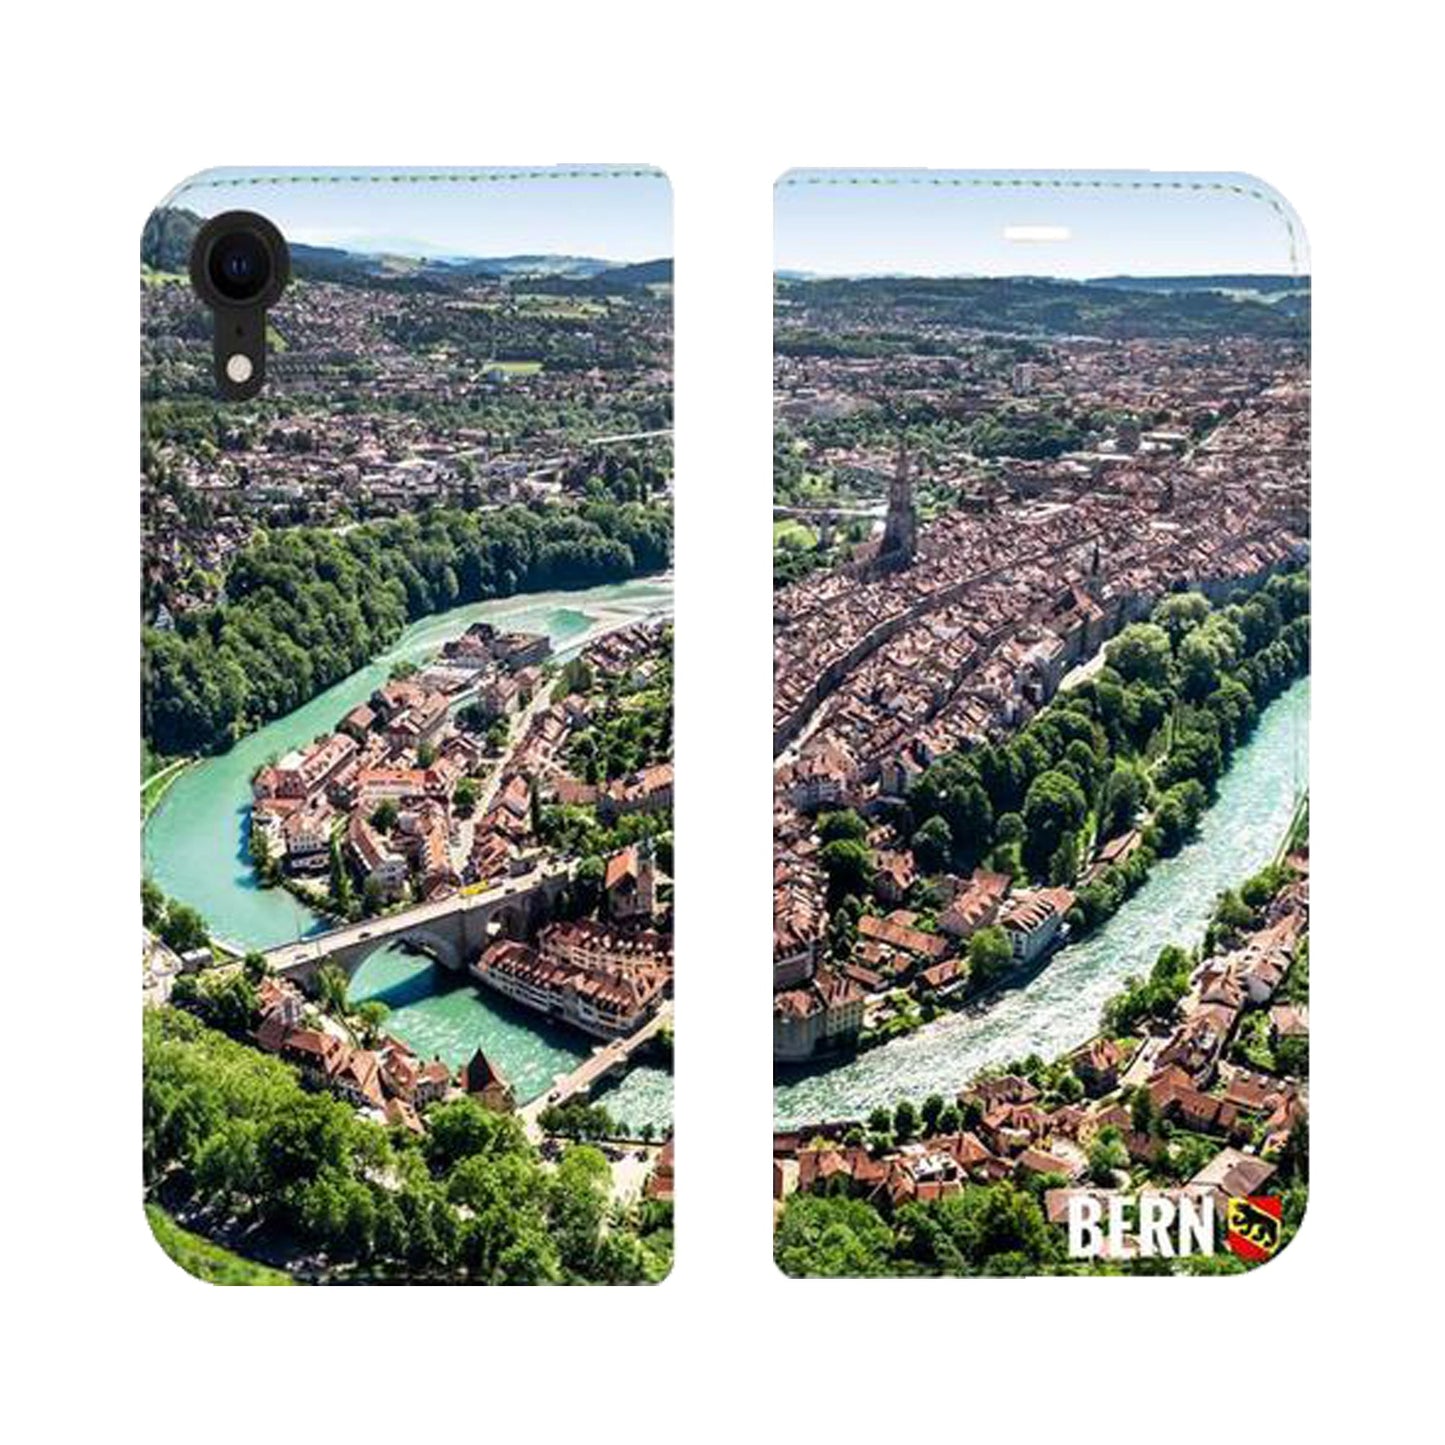 Bern City Panorama Case for the iPhone XR